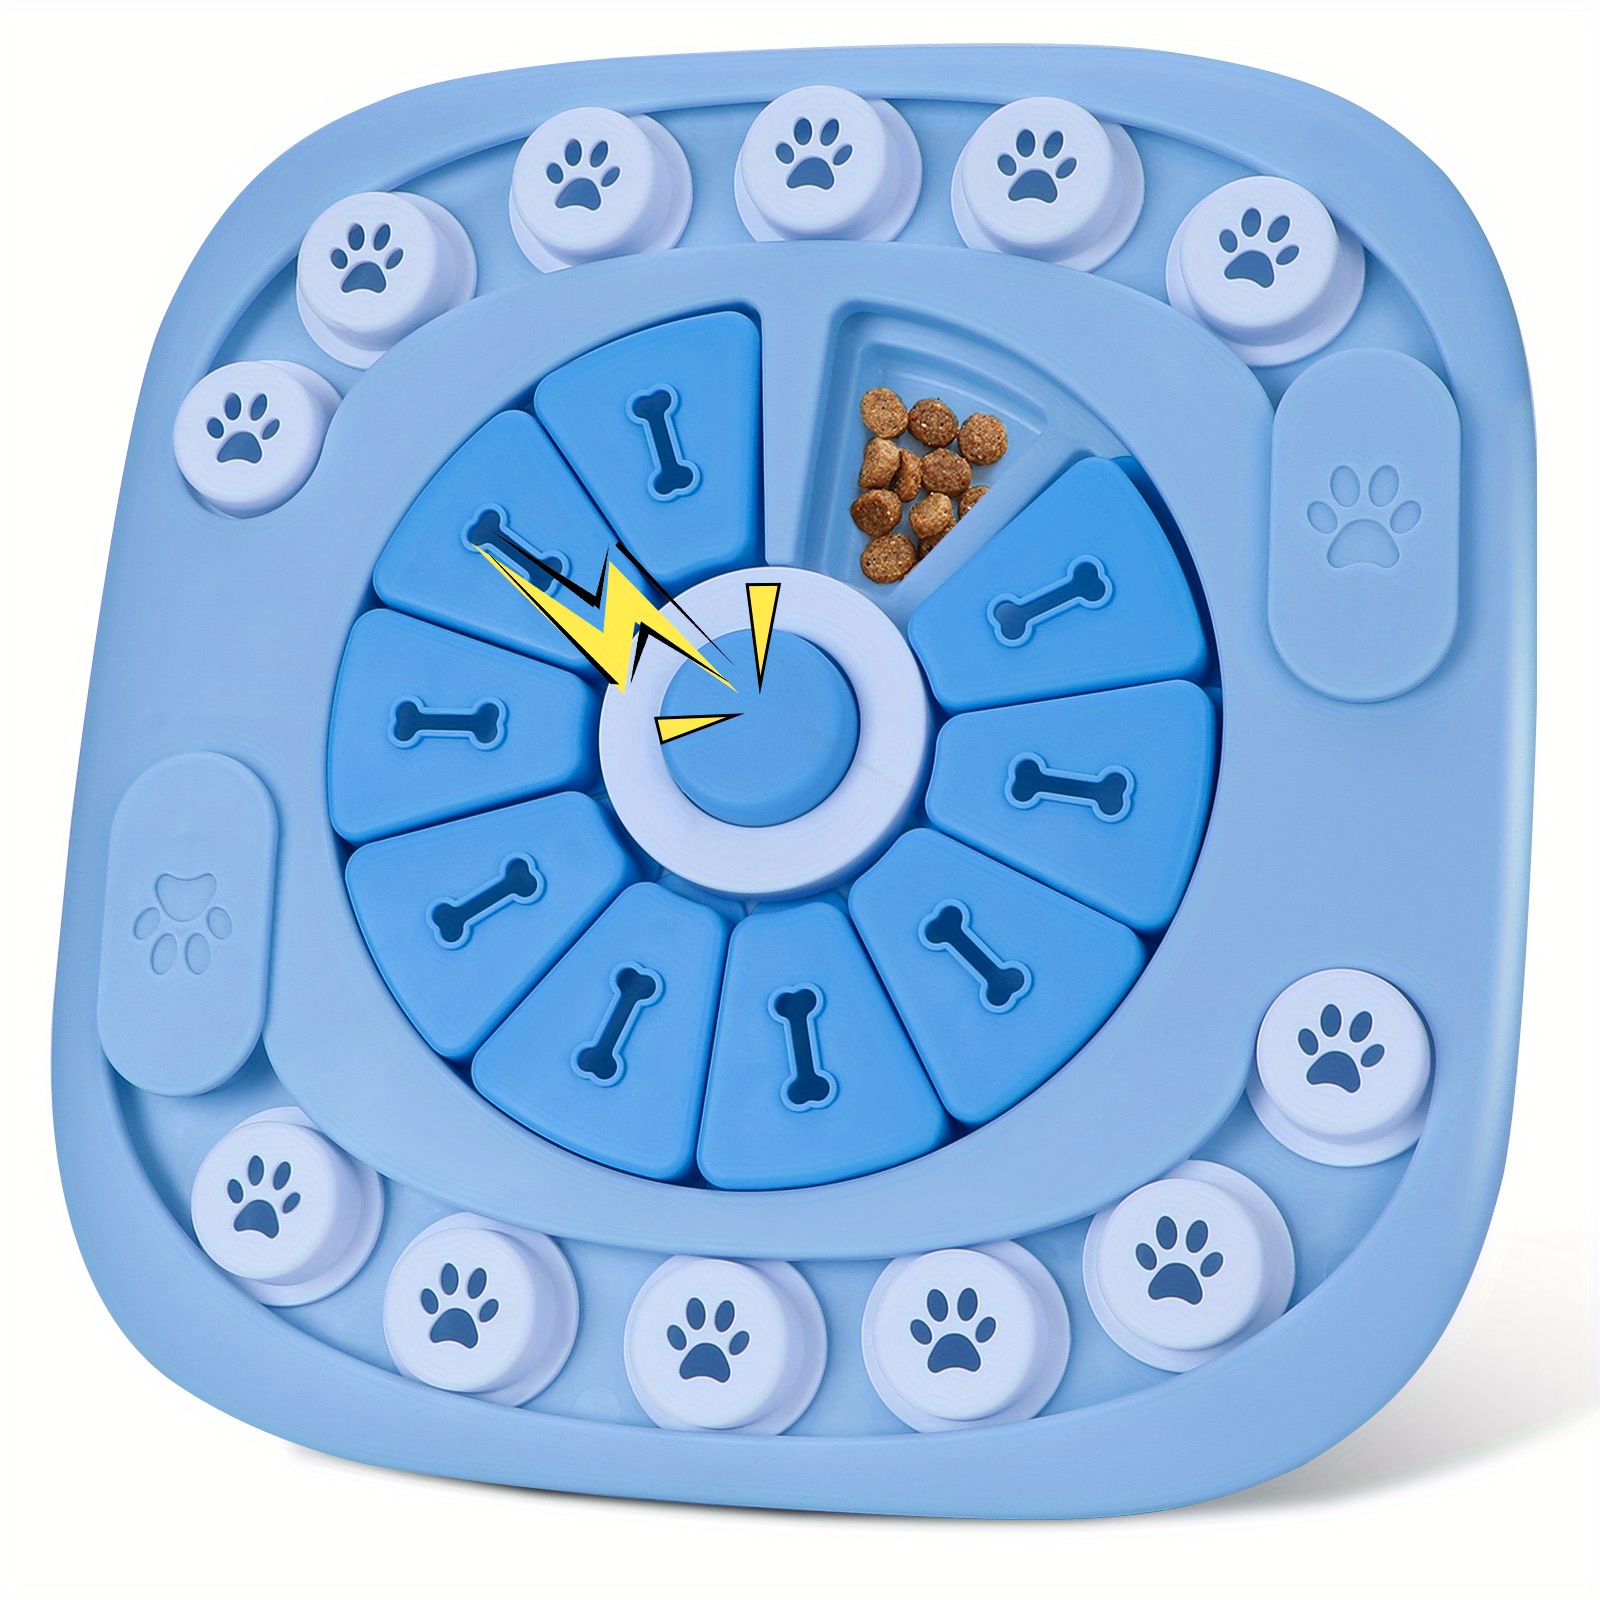 Interactive Dog Puzzle Toy With Squeaker - Slow Feeder For Small, Medium,  And Large Dogs - Promotes Mental Stimulation And Healthy Eating Habits -  Temu